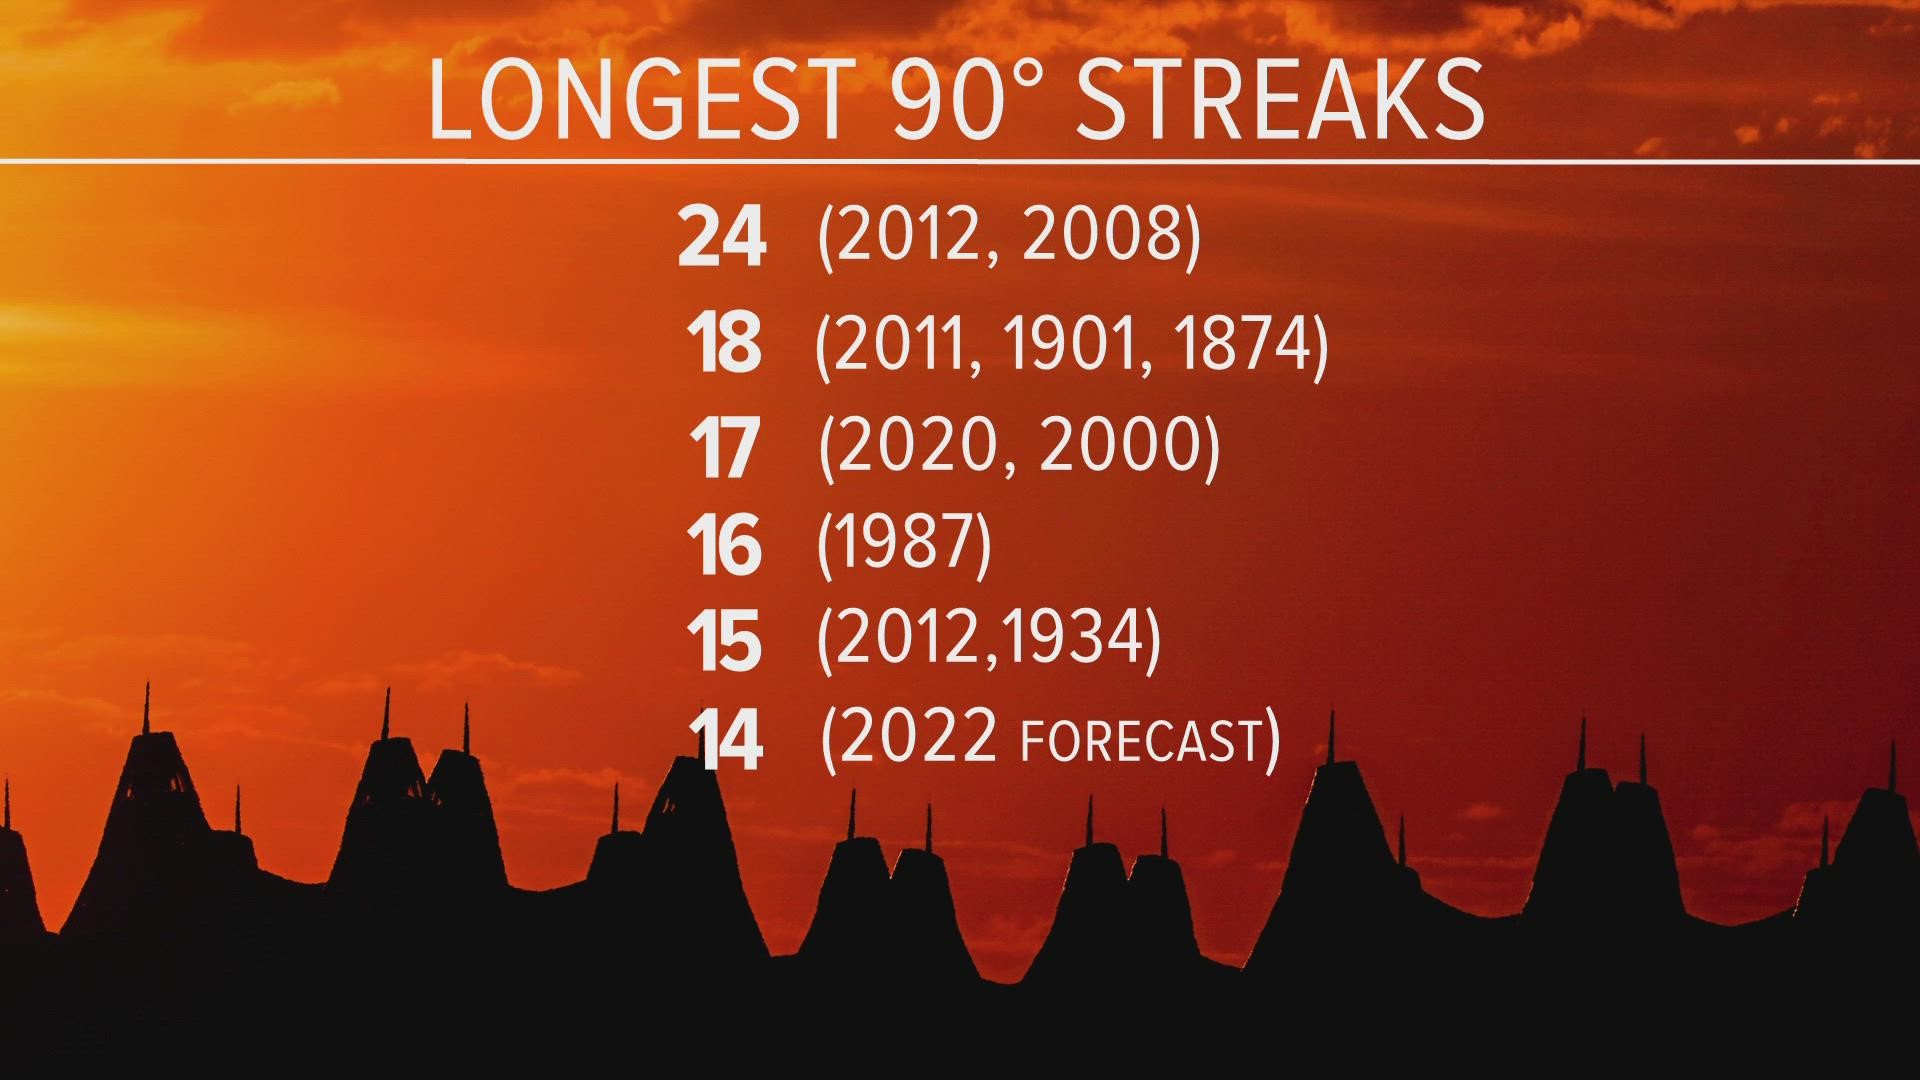 This summer is on pace to be one of the hottest of all time. It hit 96 degrees in Denver on Tuesday which could be the beginning of an unusually long heat wave.